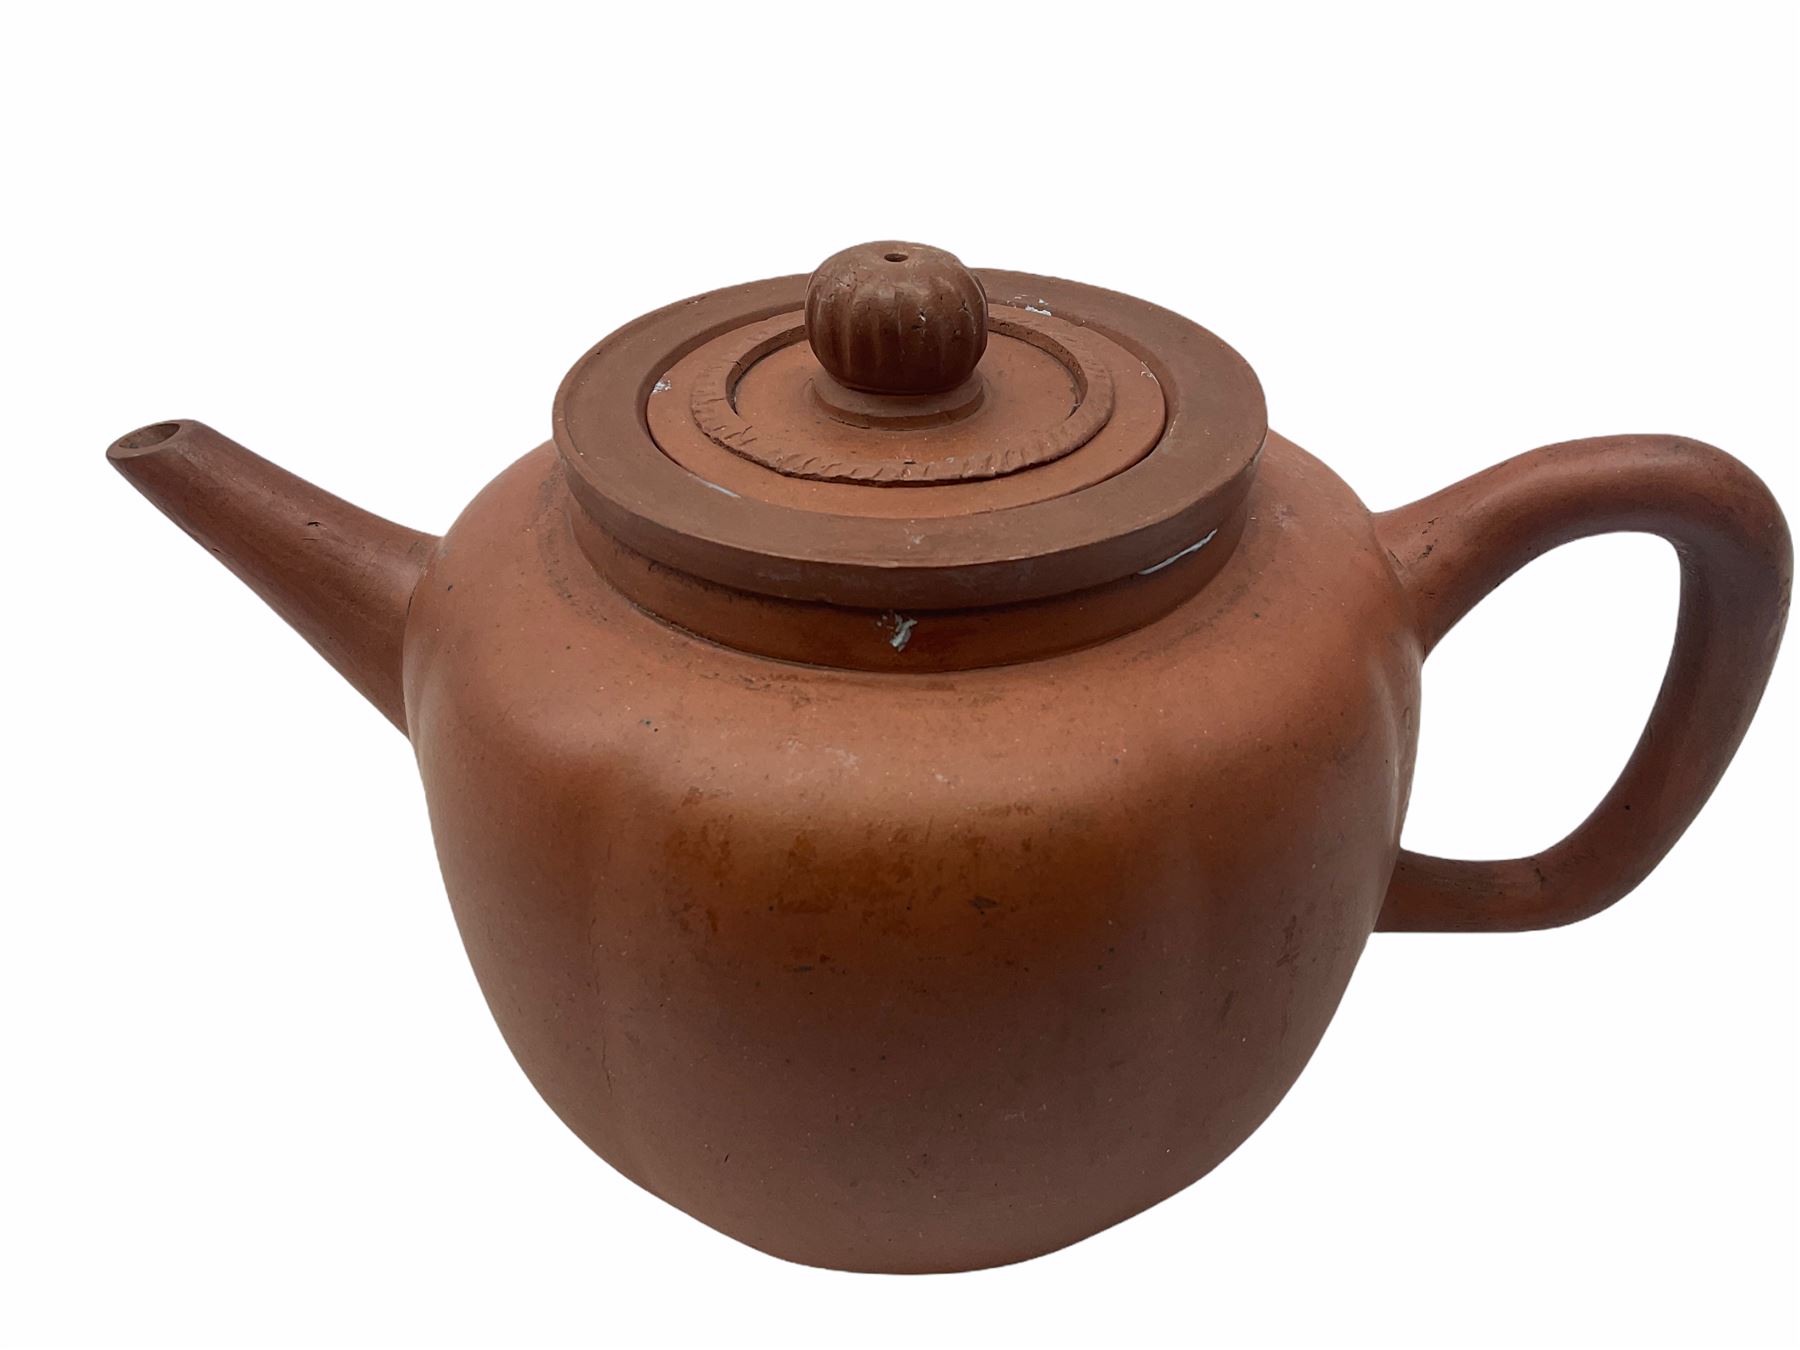 Chinese red terracotta teapot - Image 3 of 6